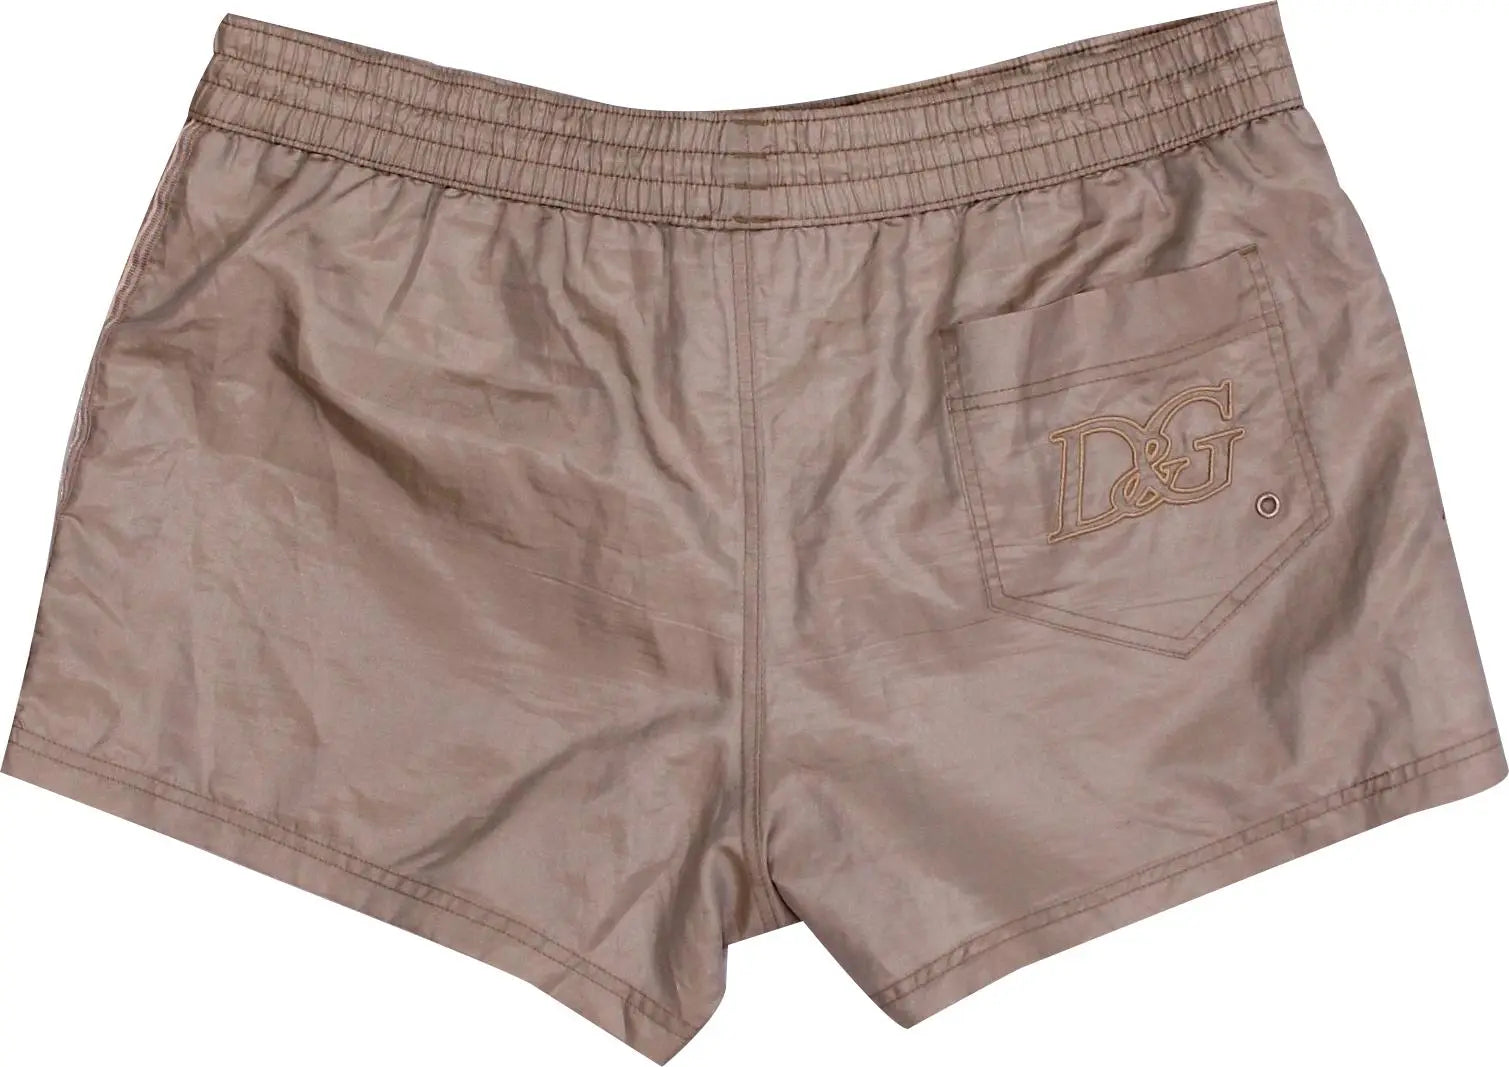 Dolce & Gabbana - Gold Swim Trunk by Dolce & Gabbana- ThriftTale.com - Vintage and second handclothing